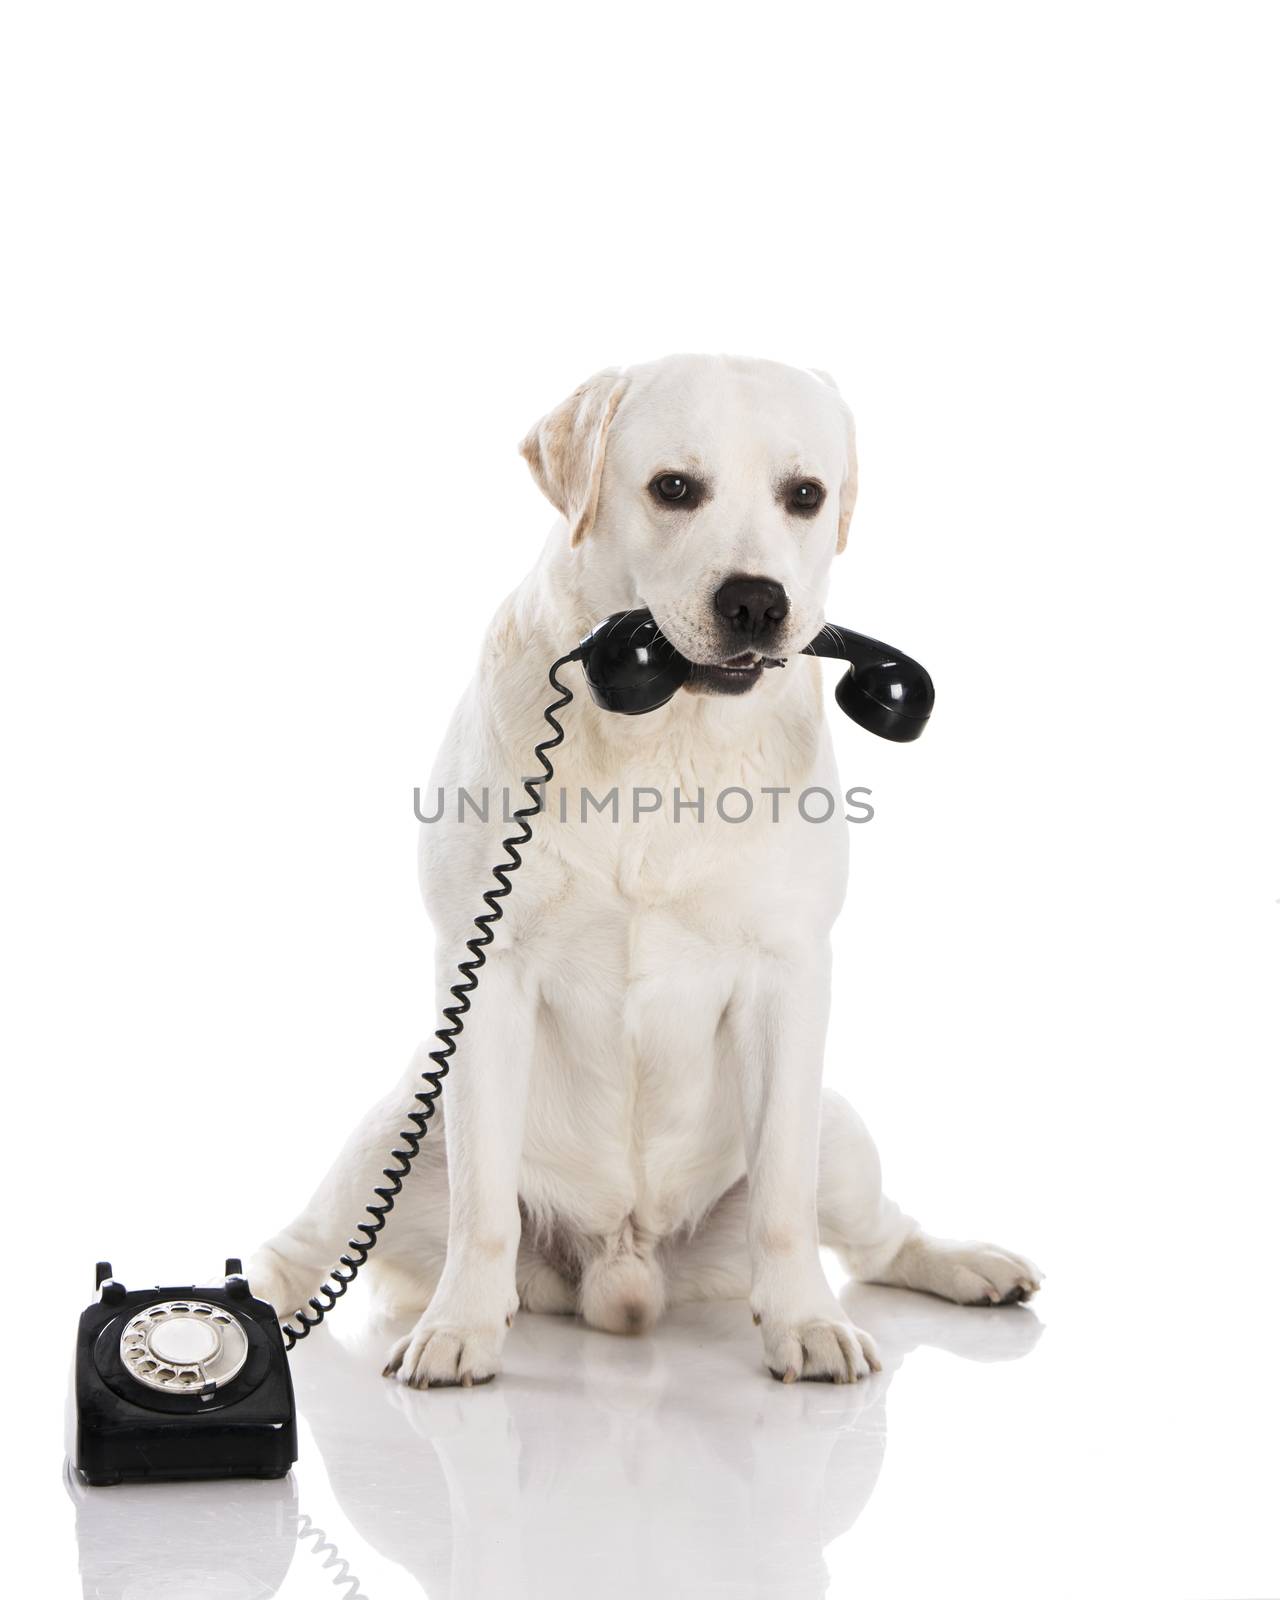 Dog and phone  by Iko